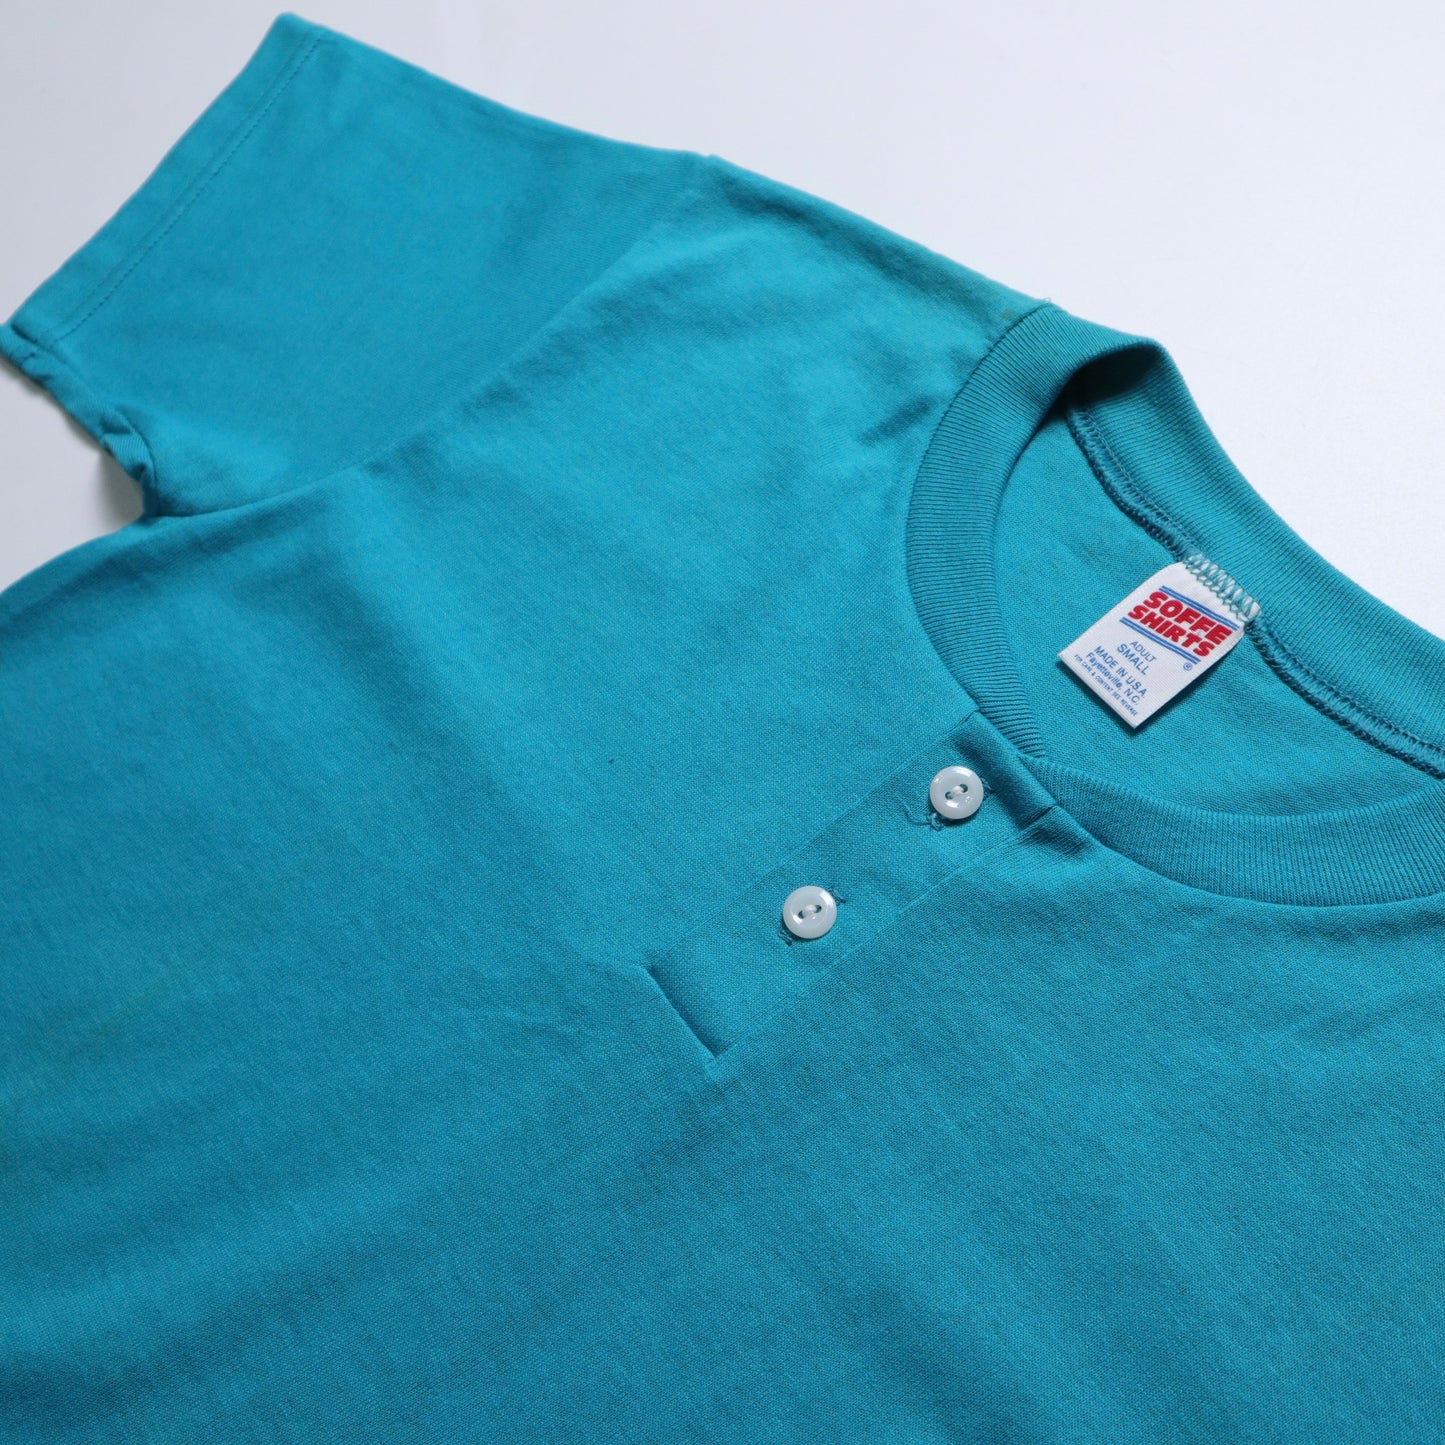 80/90s American-made SOFFE Shirts teal henley collar tee